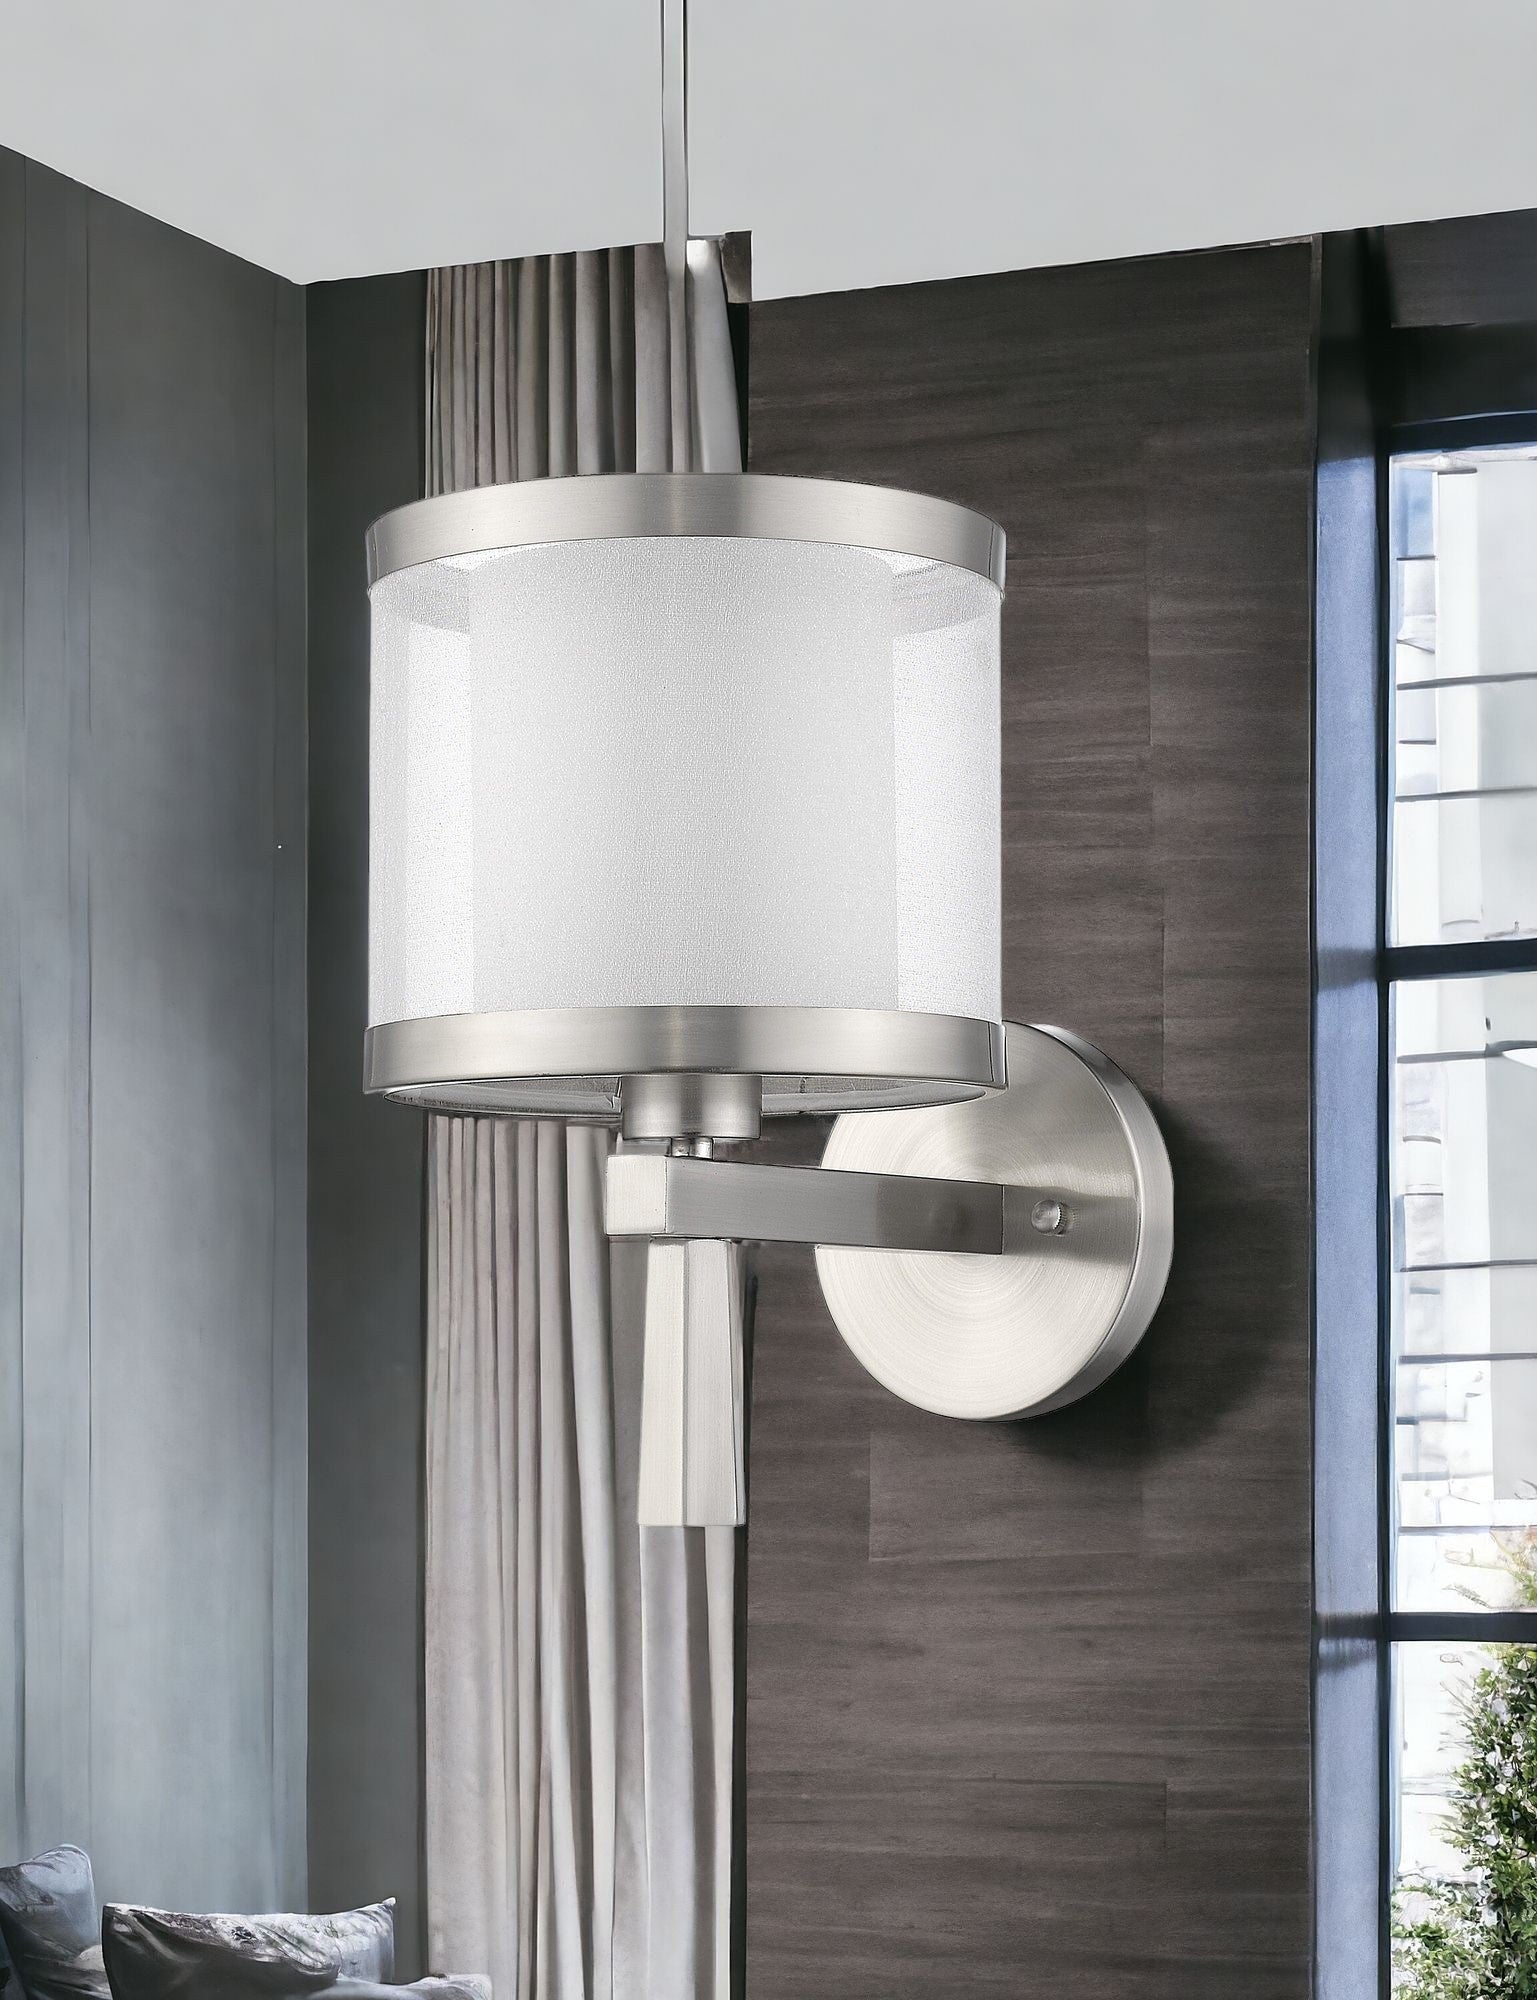 White and Silver Wall Light with Fabric Shade